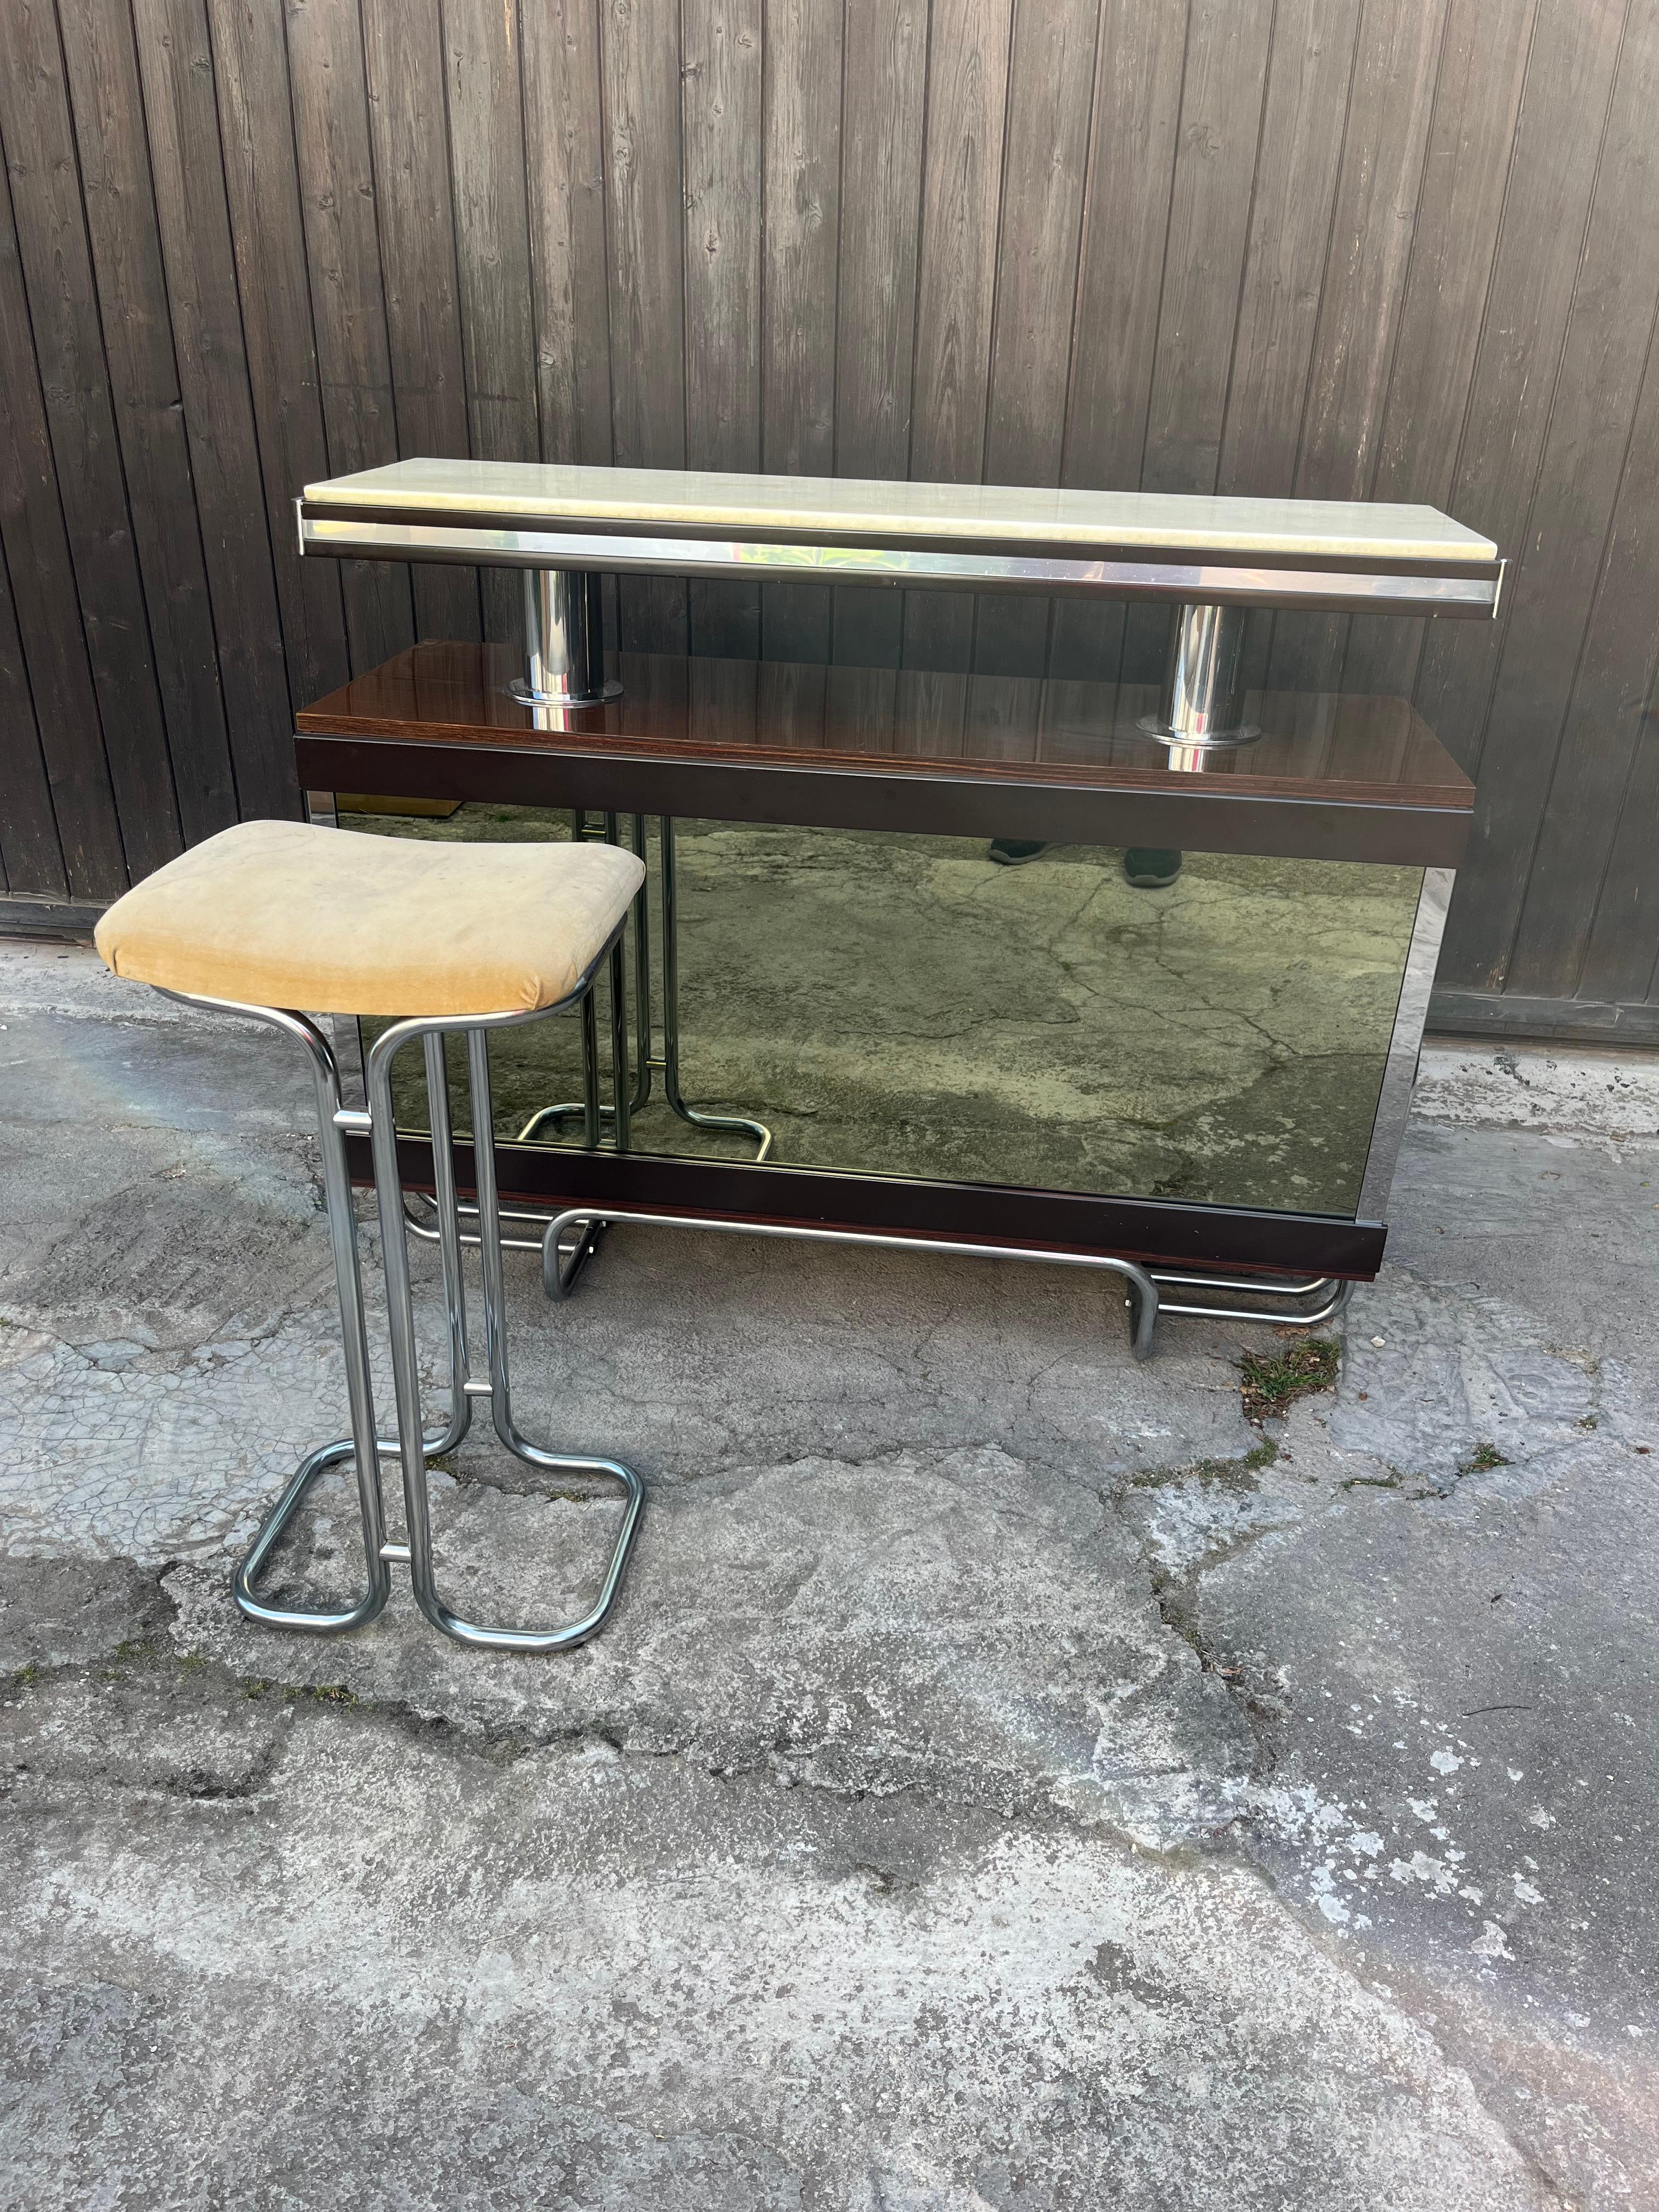 Italian Vintage Mirrored Bar Cabinet With Stool Attributed to Luciano Frigerio 1970s